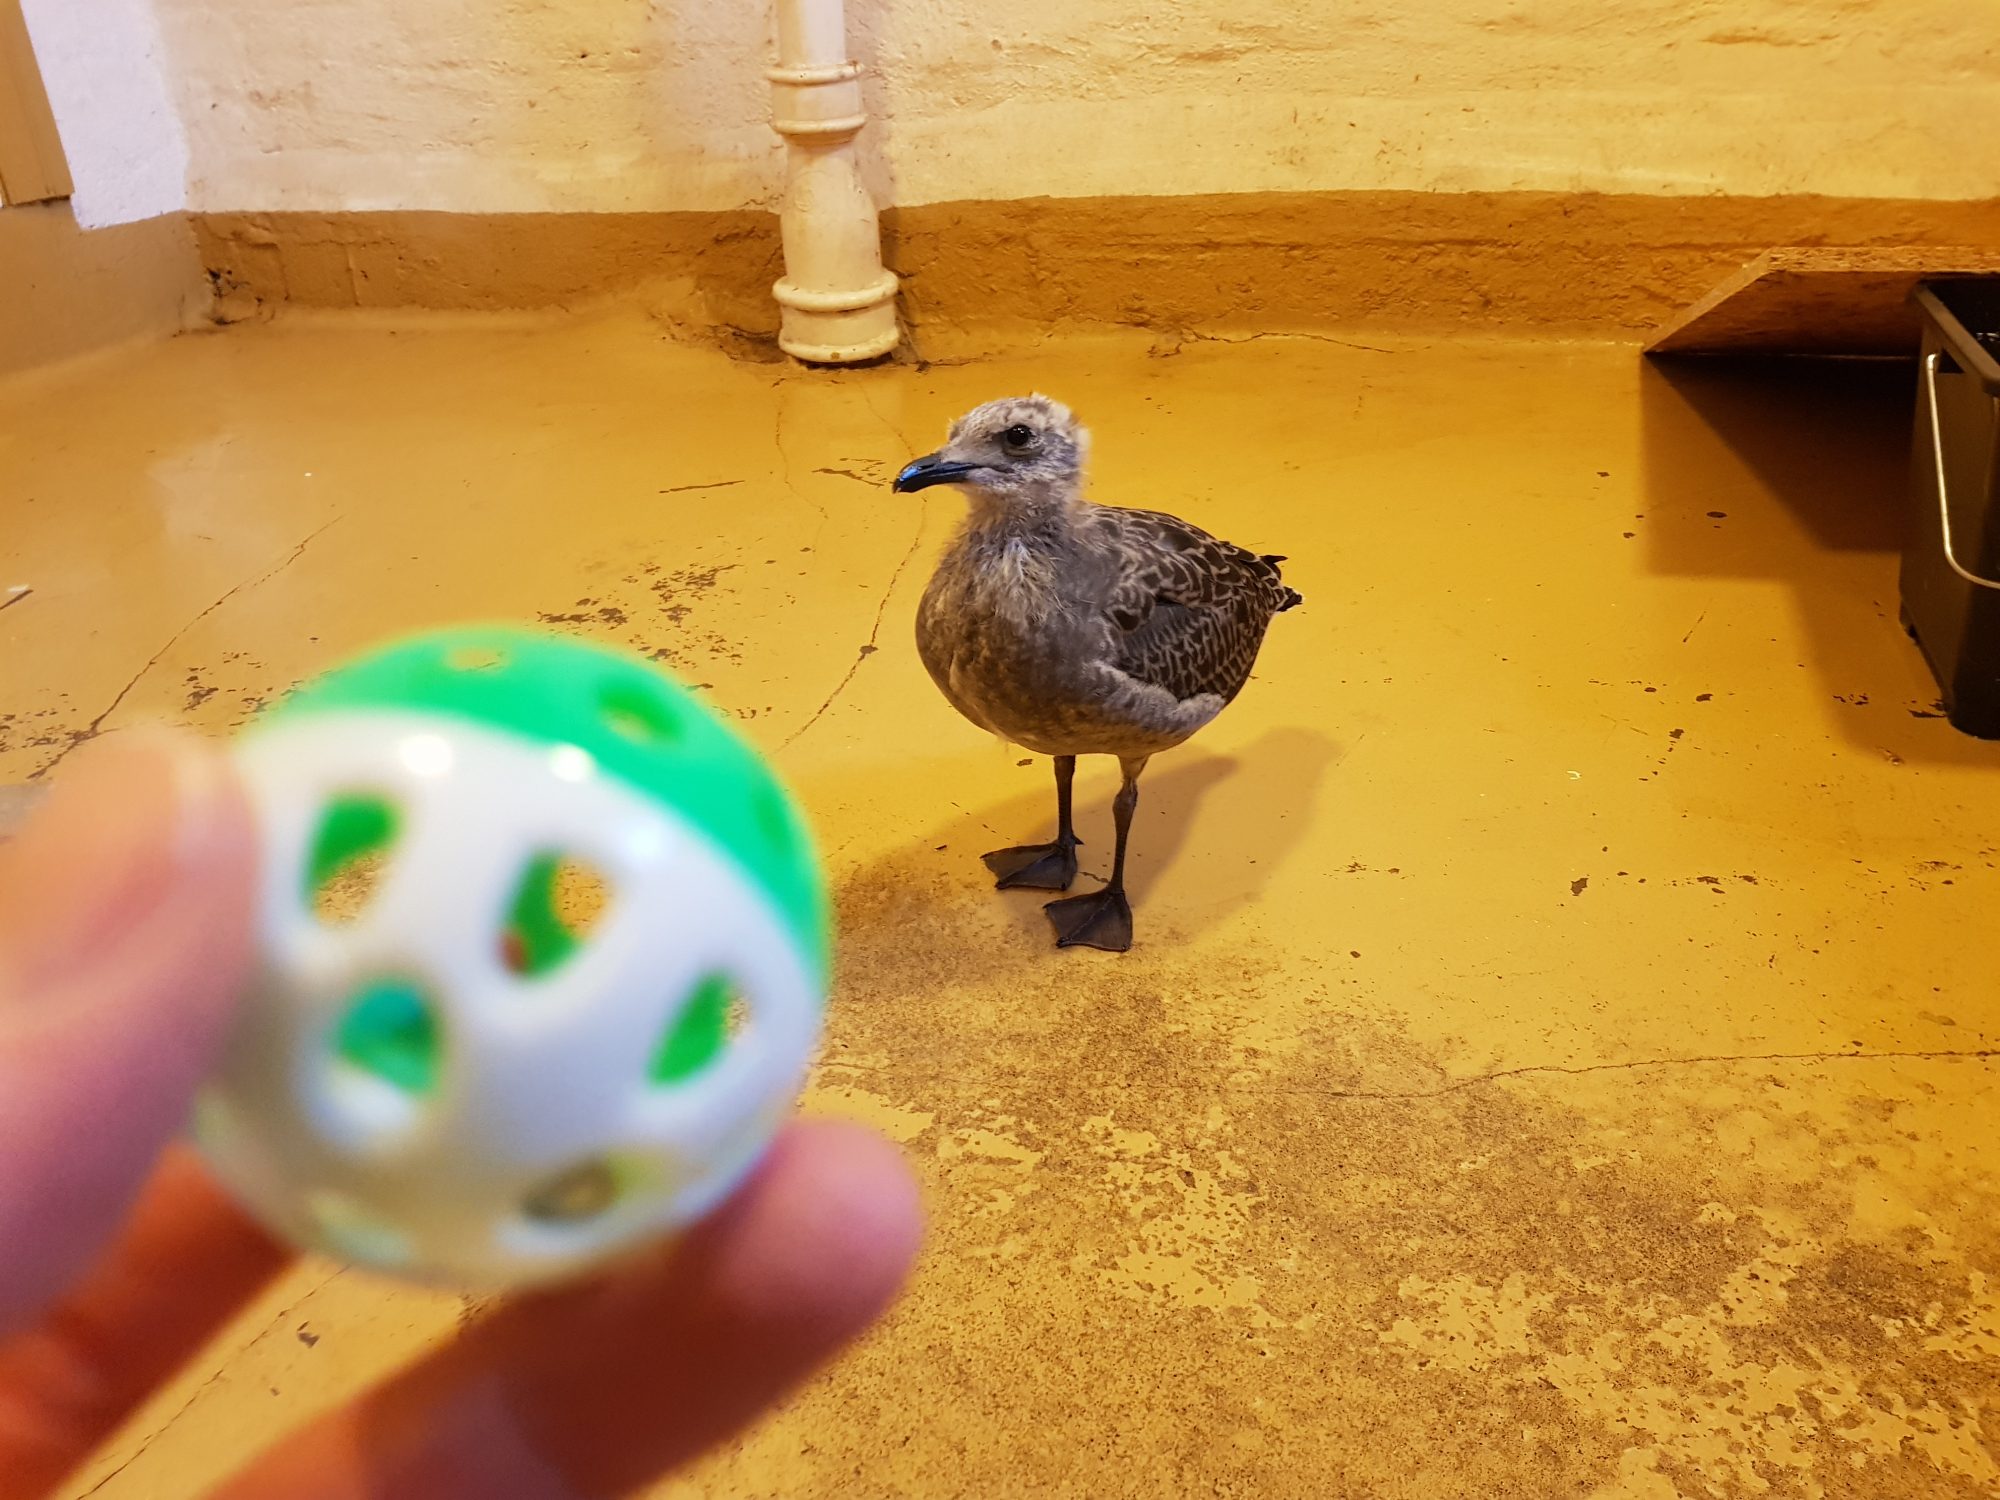 A photo of a baby seagull in the basement of a house with the forefront of the photo being coxy's hand holding a ball in the direction of the seagull.